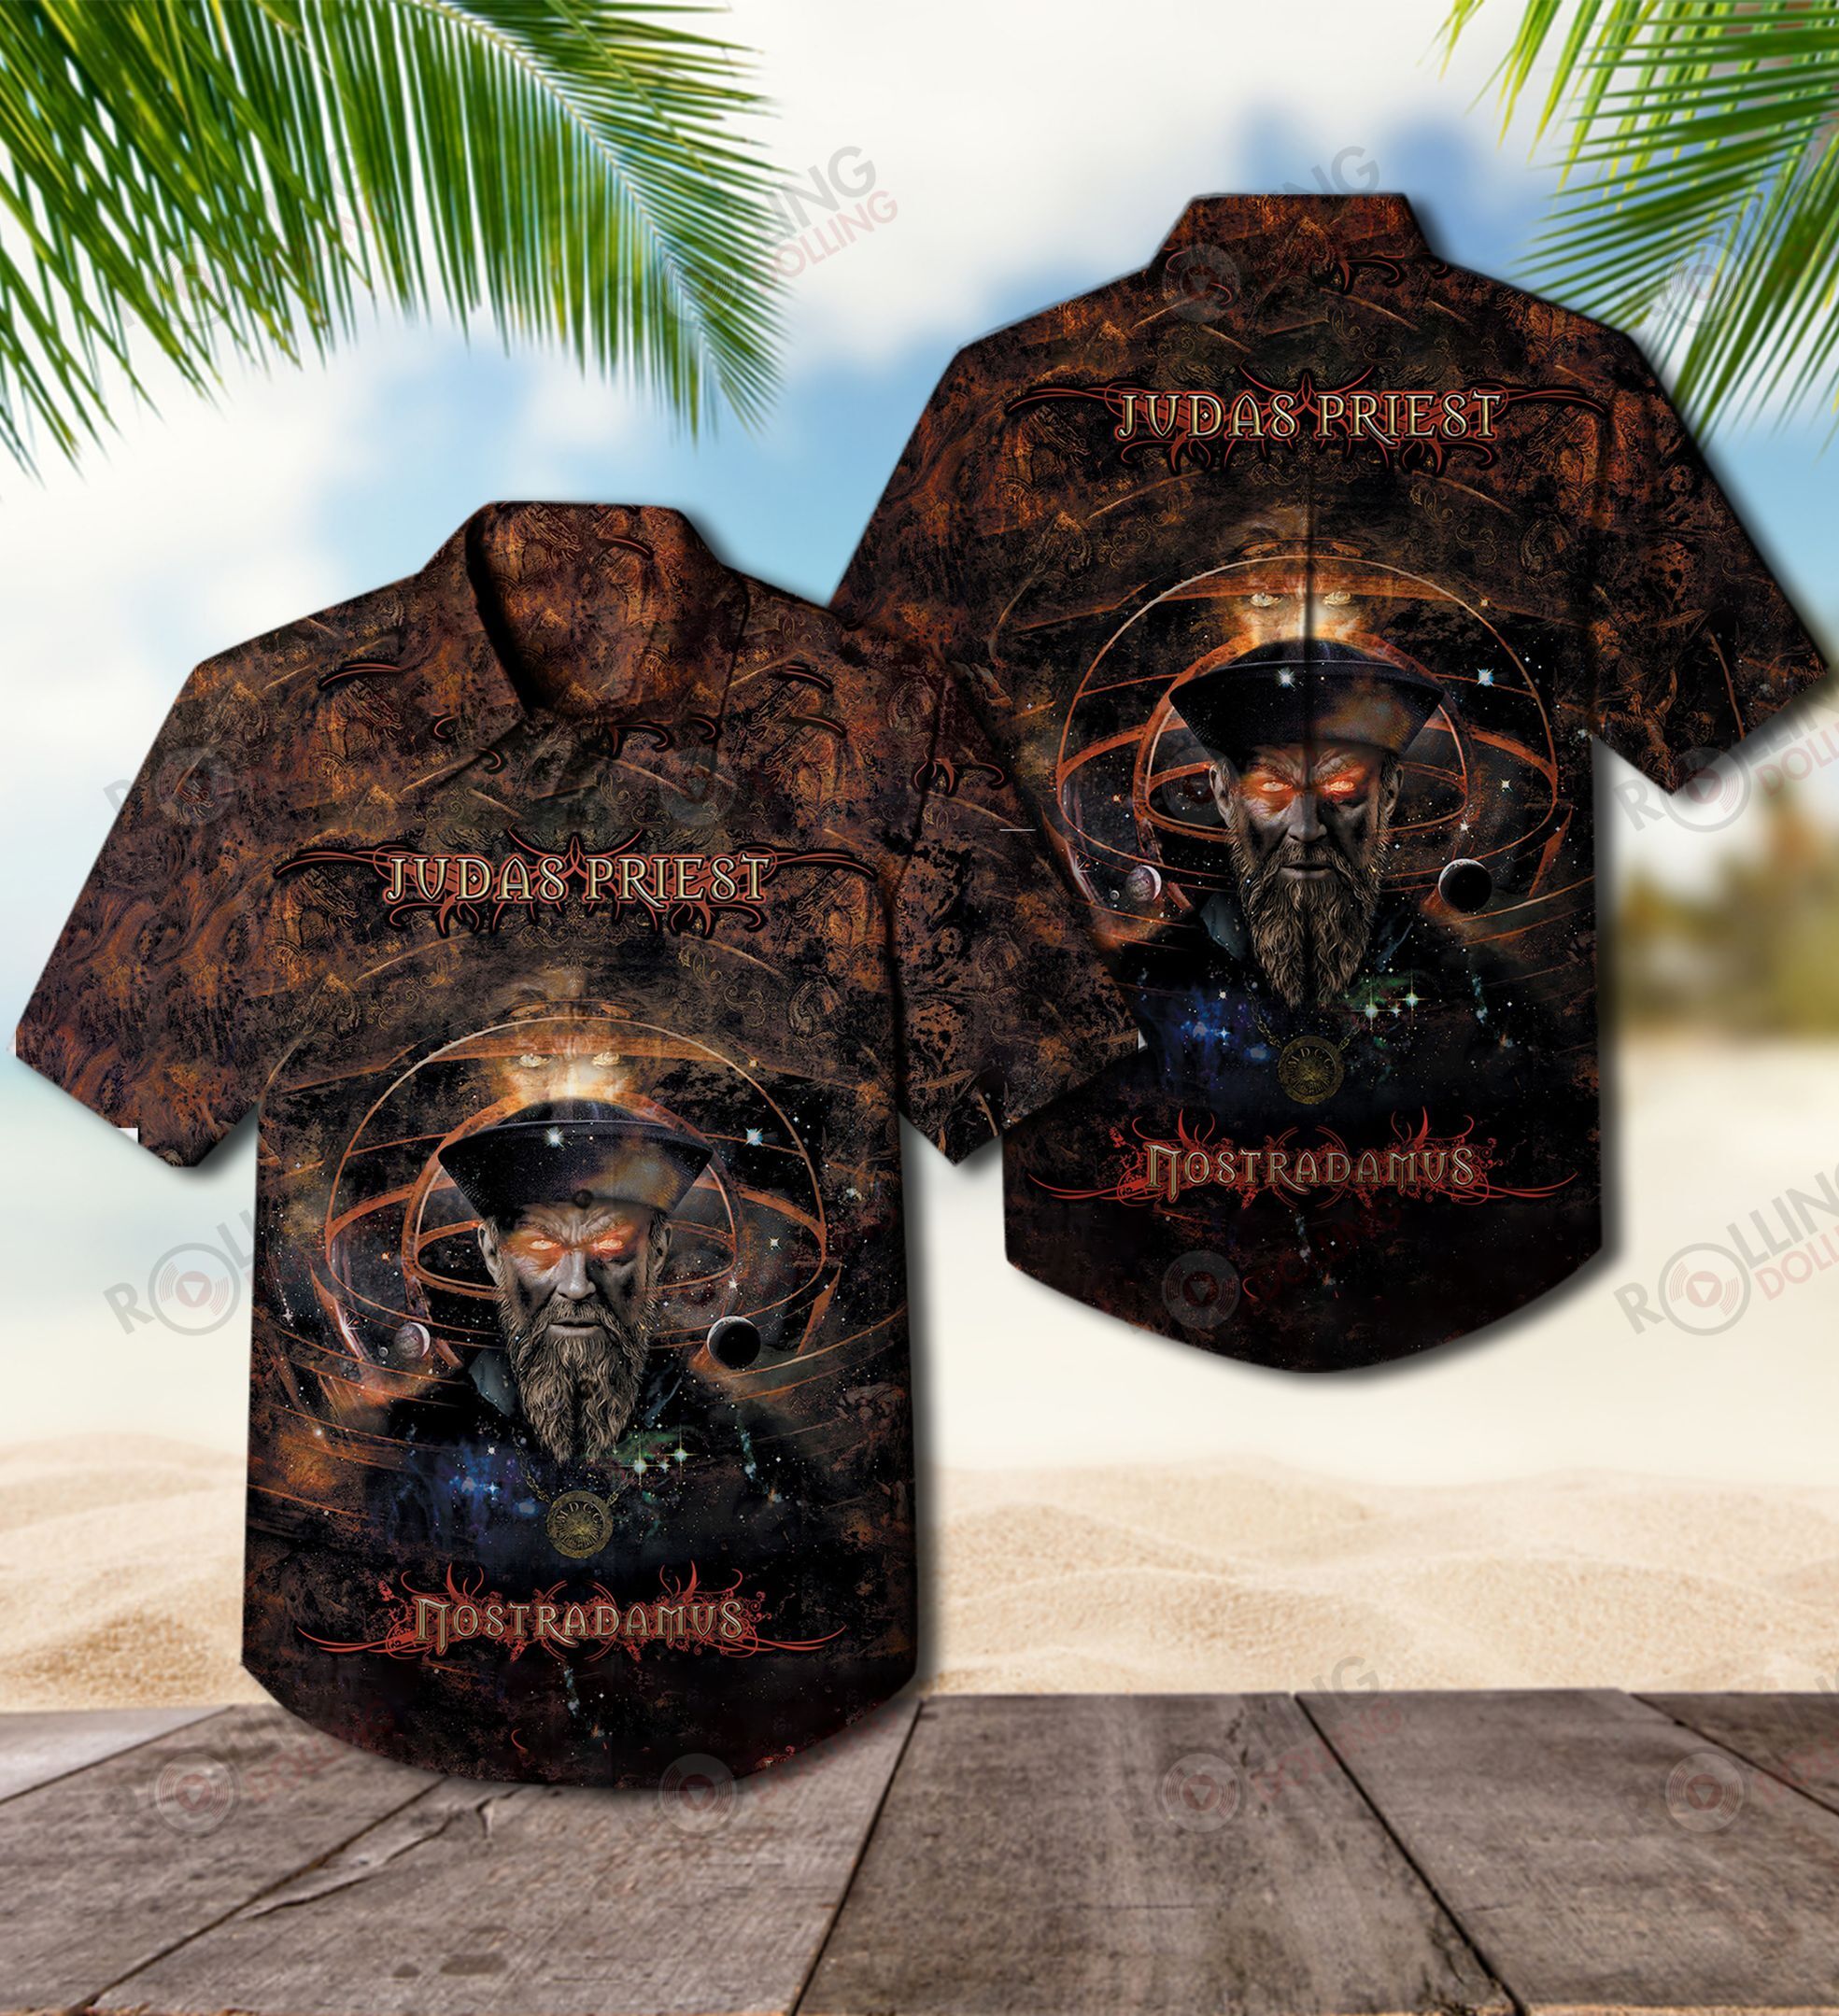 You'll have the perfect vacation outfit with this Hawaiian shirt 167